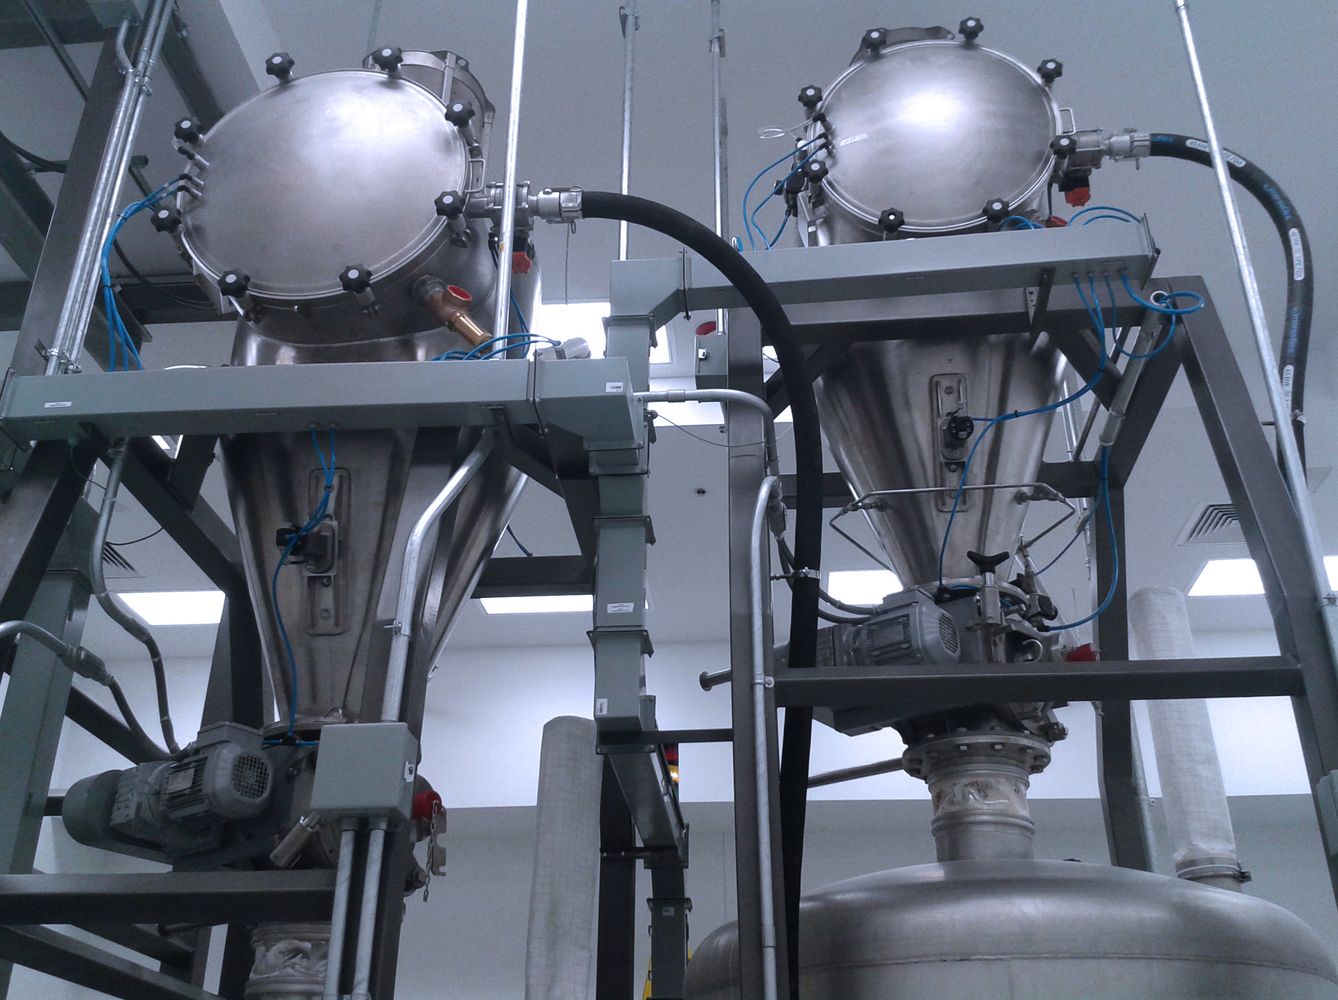 A pair of PCC 700 machines in a food production facility with stainless steel conical hoppers mounted on metal frames. The equipment, featuring a series of clamps, valves, and flexible tubing, is designed for bulk material handling in a hygienic environment.